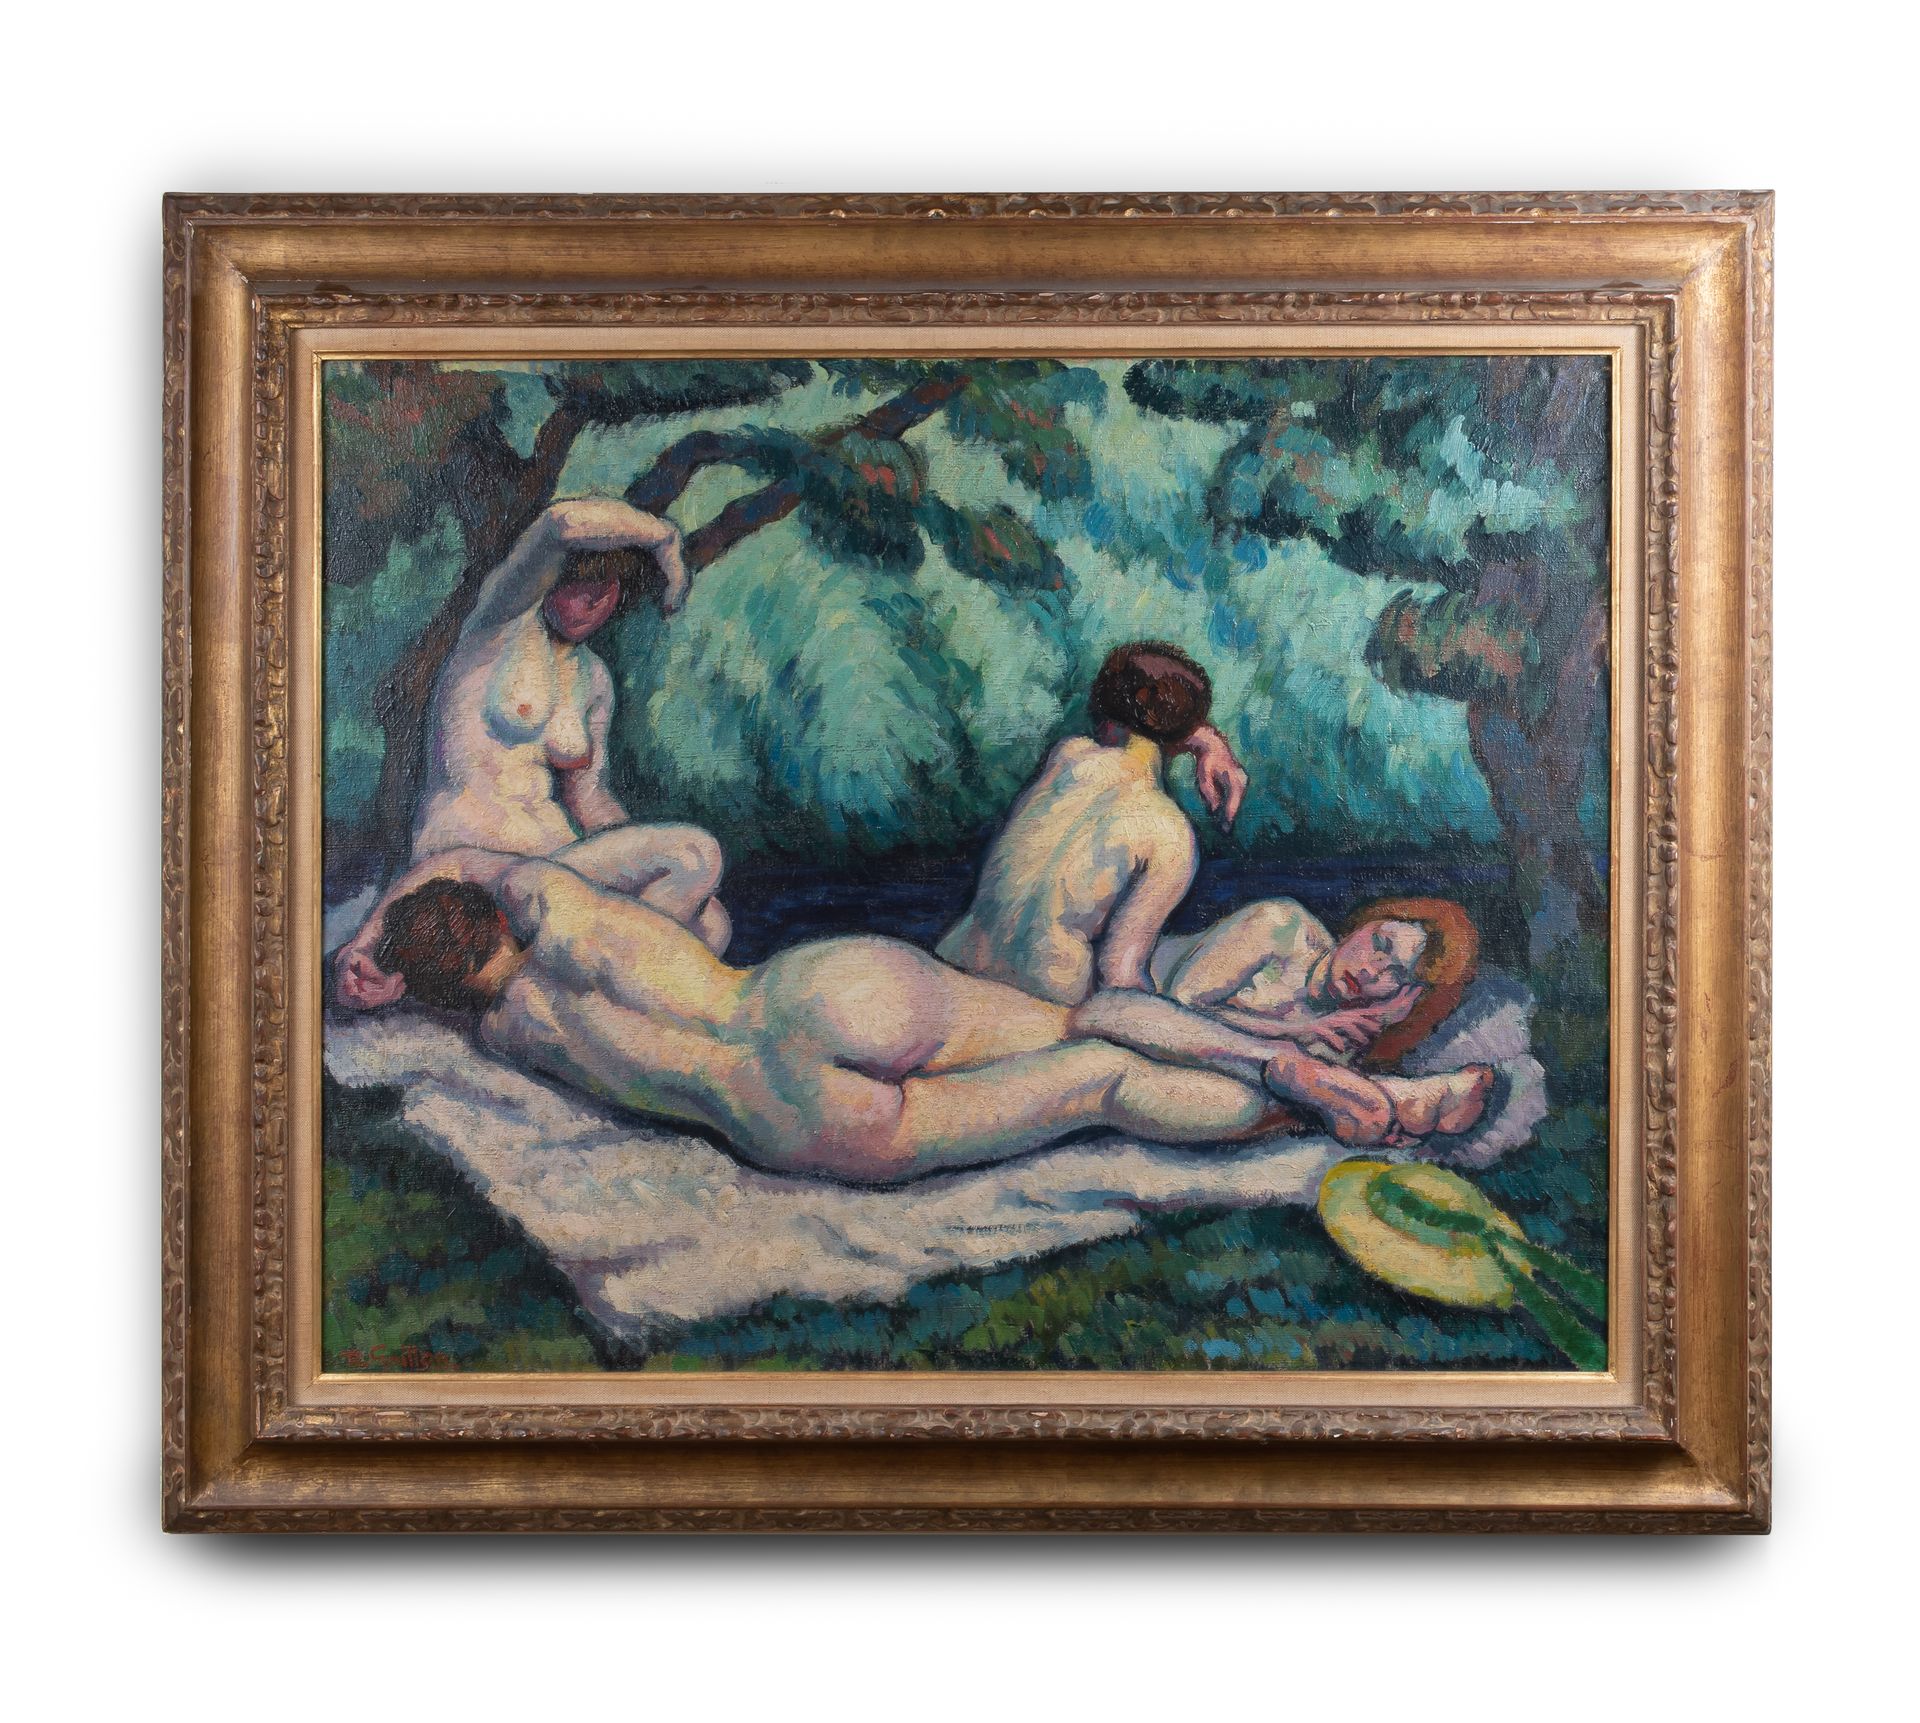 Null Roger GRILLON (1881-1938) 

Bathers, 1914

Oil on canvas signed lower left,&hellip;